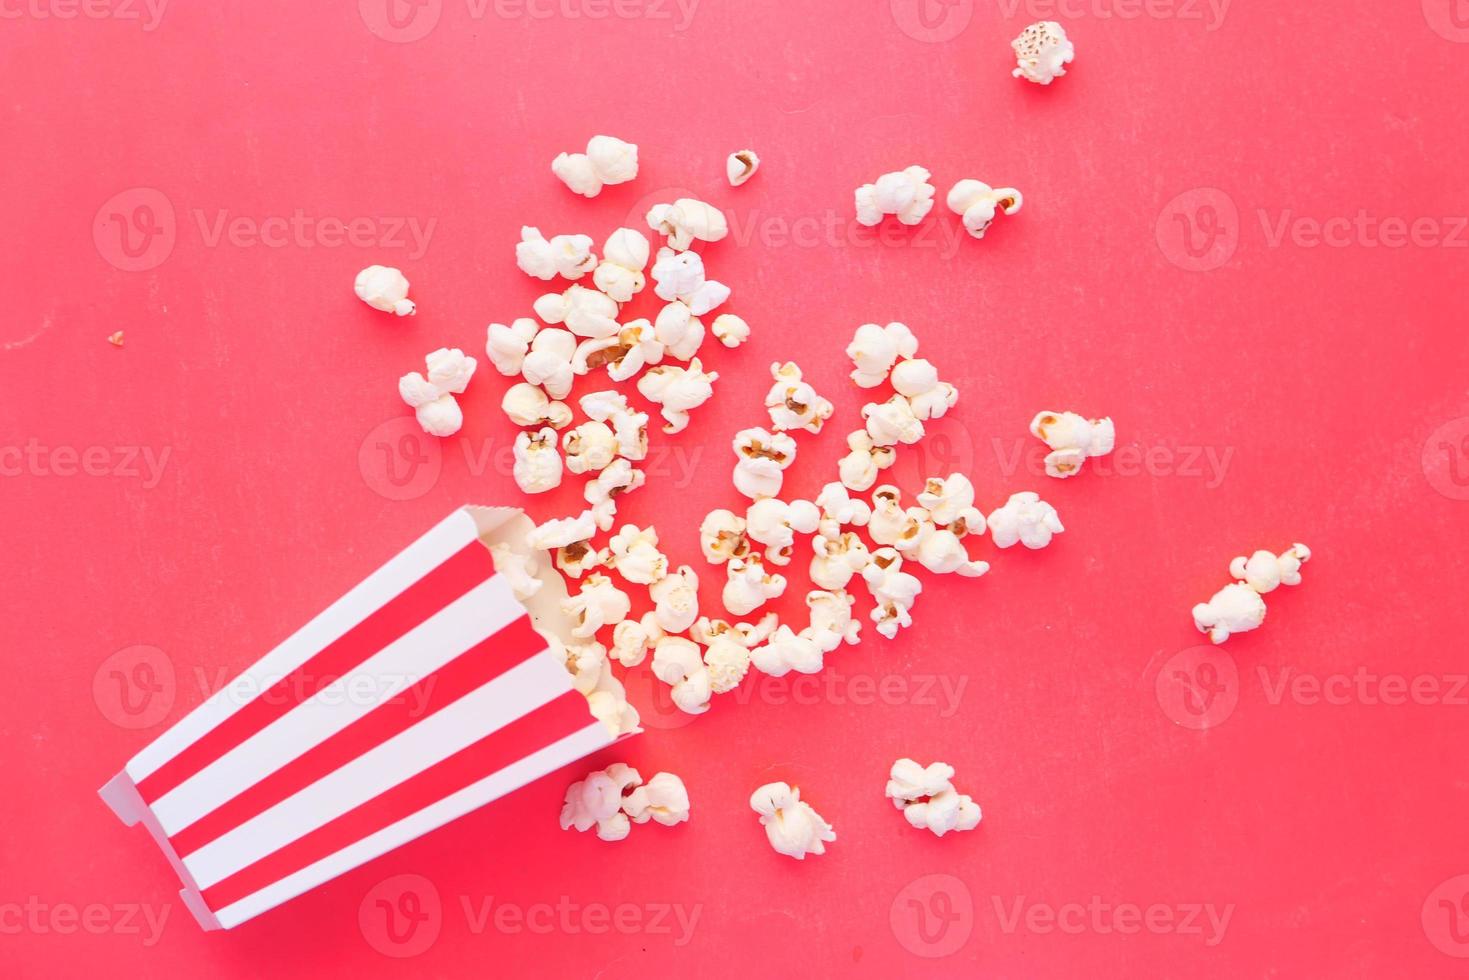 Popcorn on a red background photo